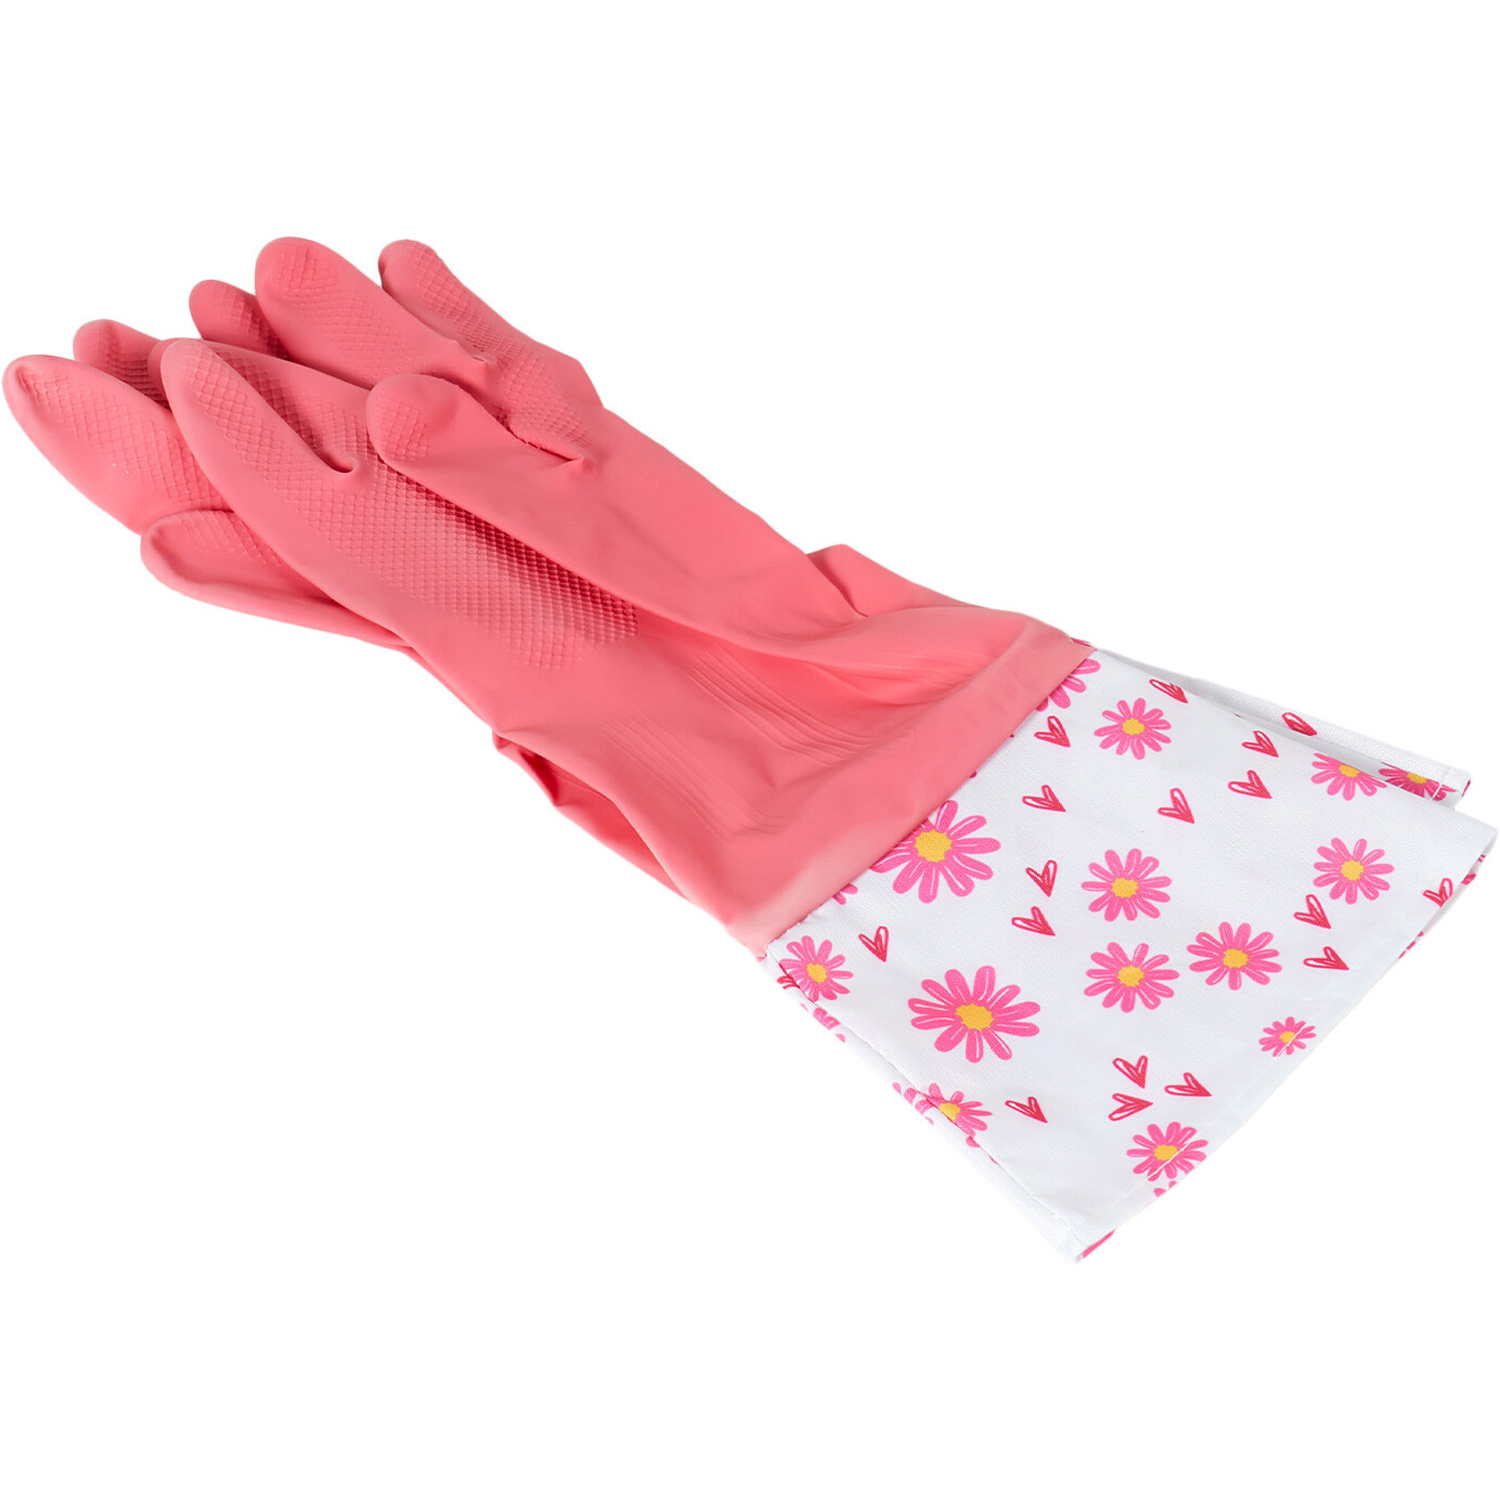 Daisy Pink Cleaning Washing Up Gloves Image 1